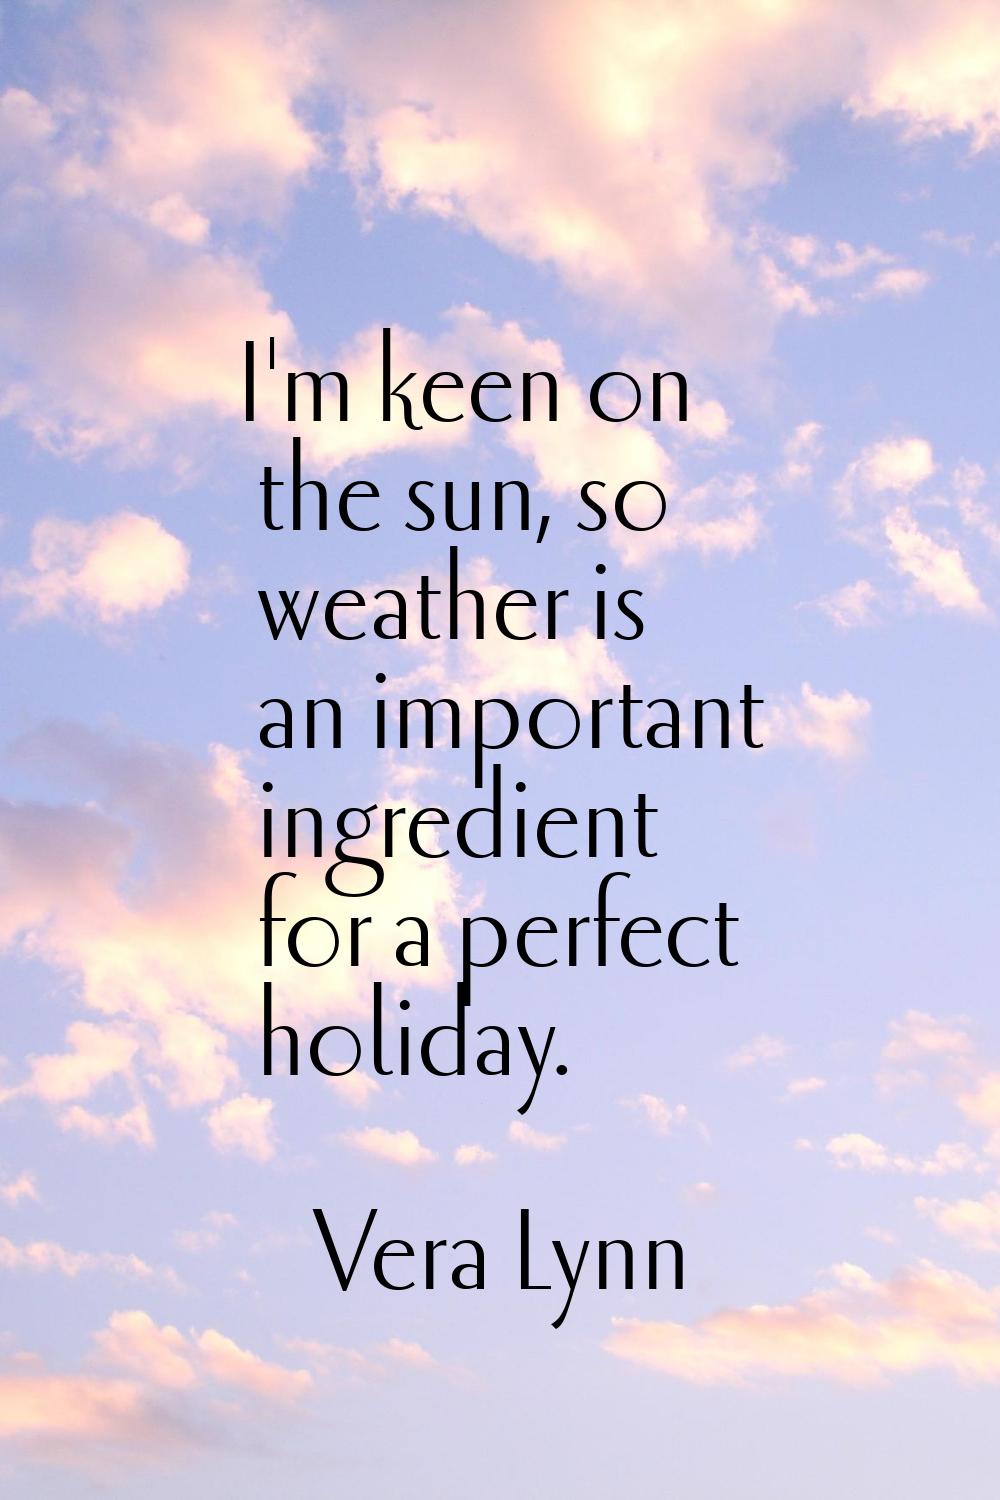 I'm keen on the sun, so weather is an important ingredient for a perfect holiday.